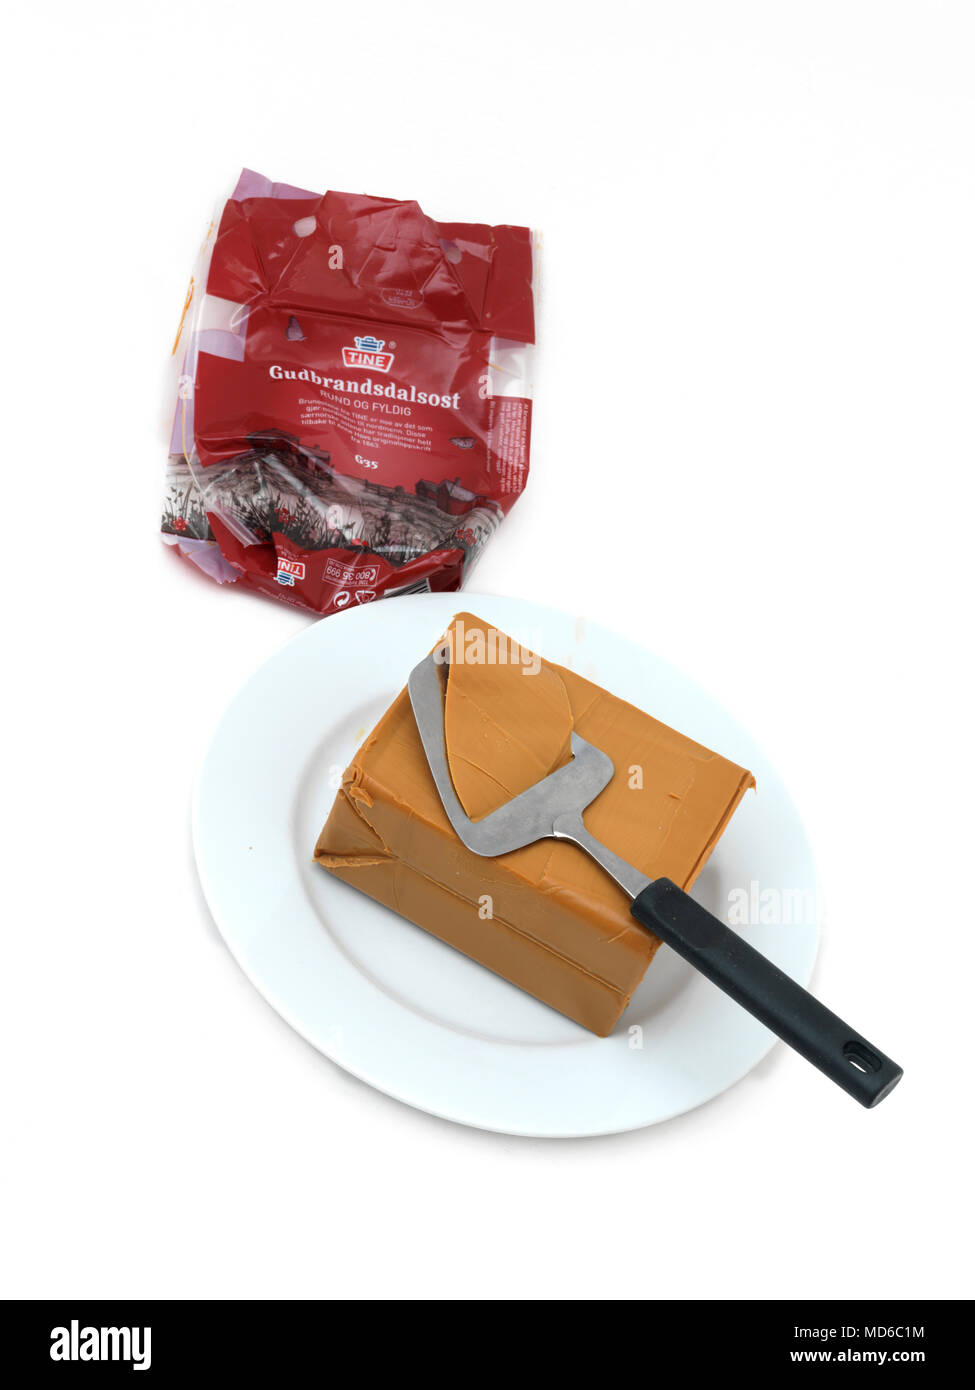 Norwegian Cheese Gjetost Gudbrandsdalsost Brown Goats Cheese On Cheese Board With Slicer Stock Photo